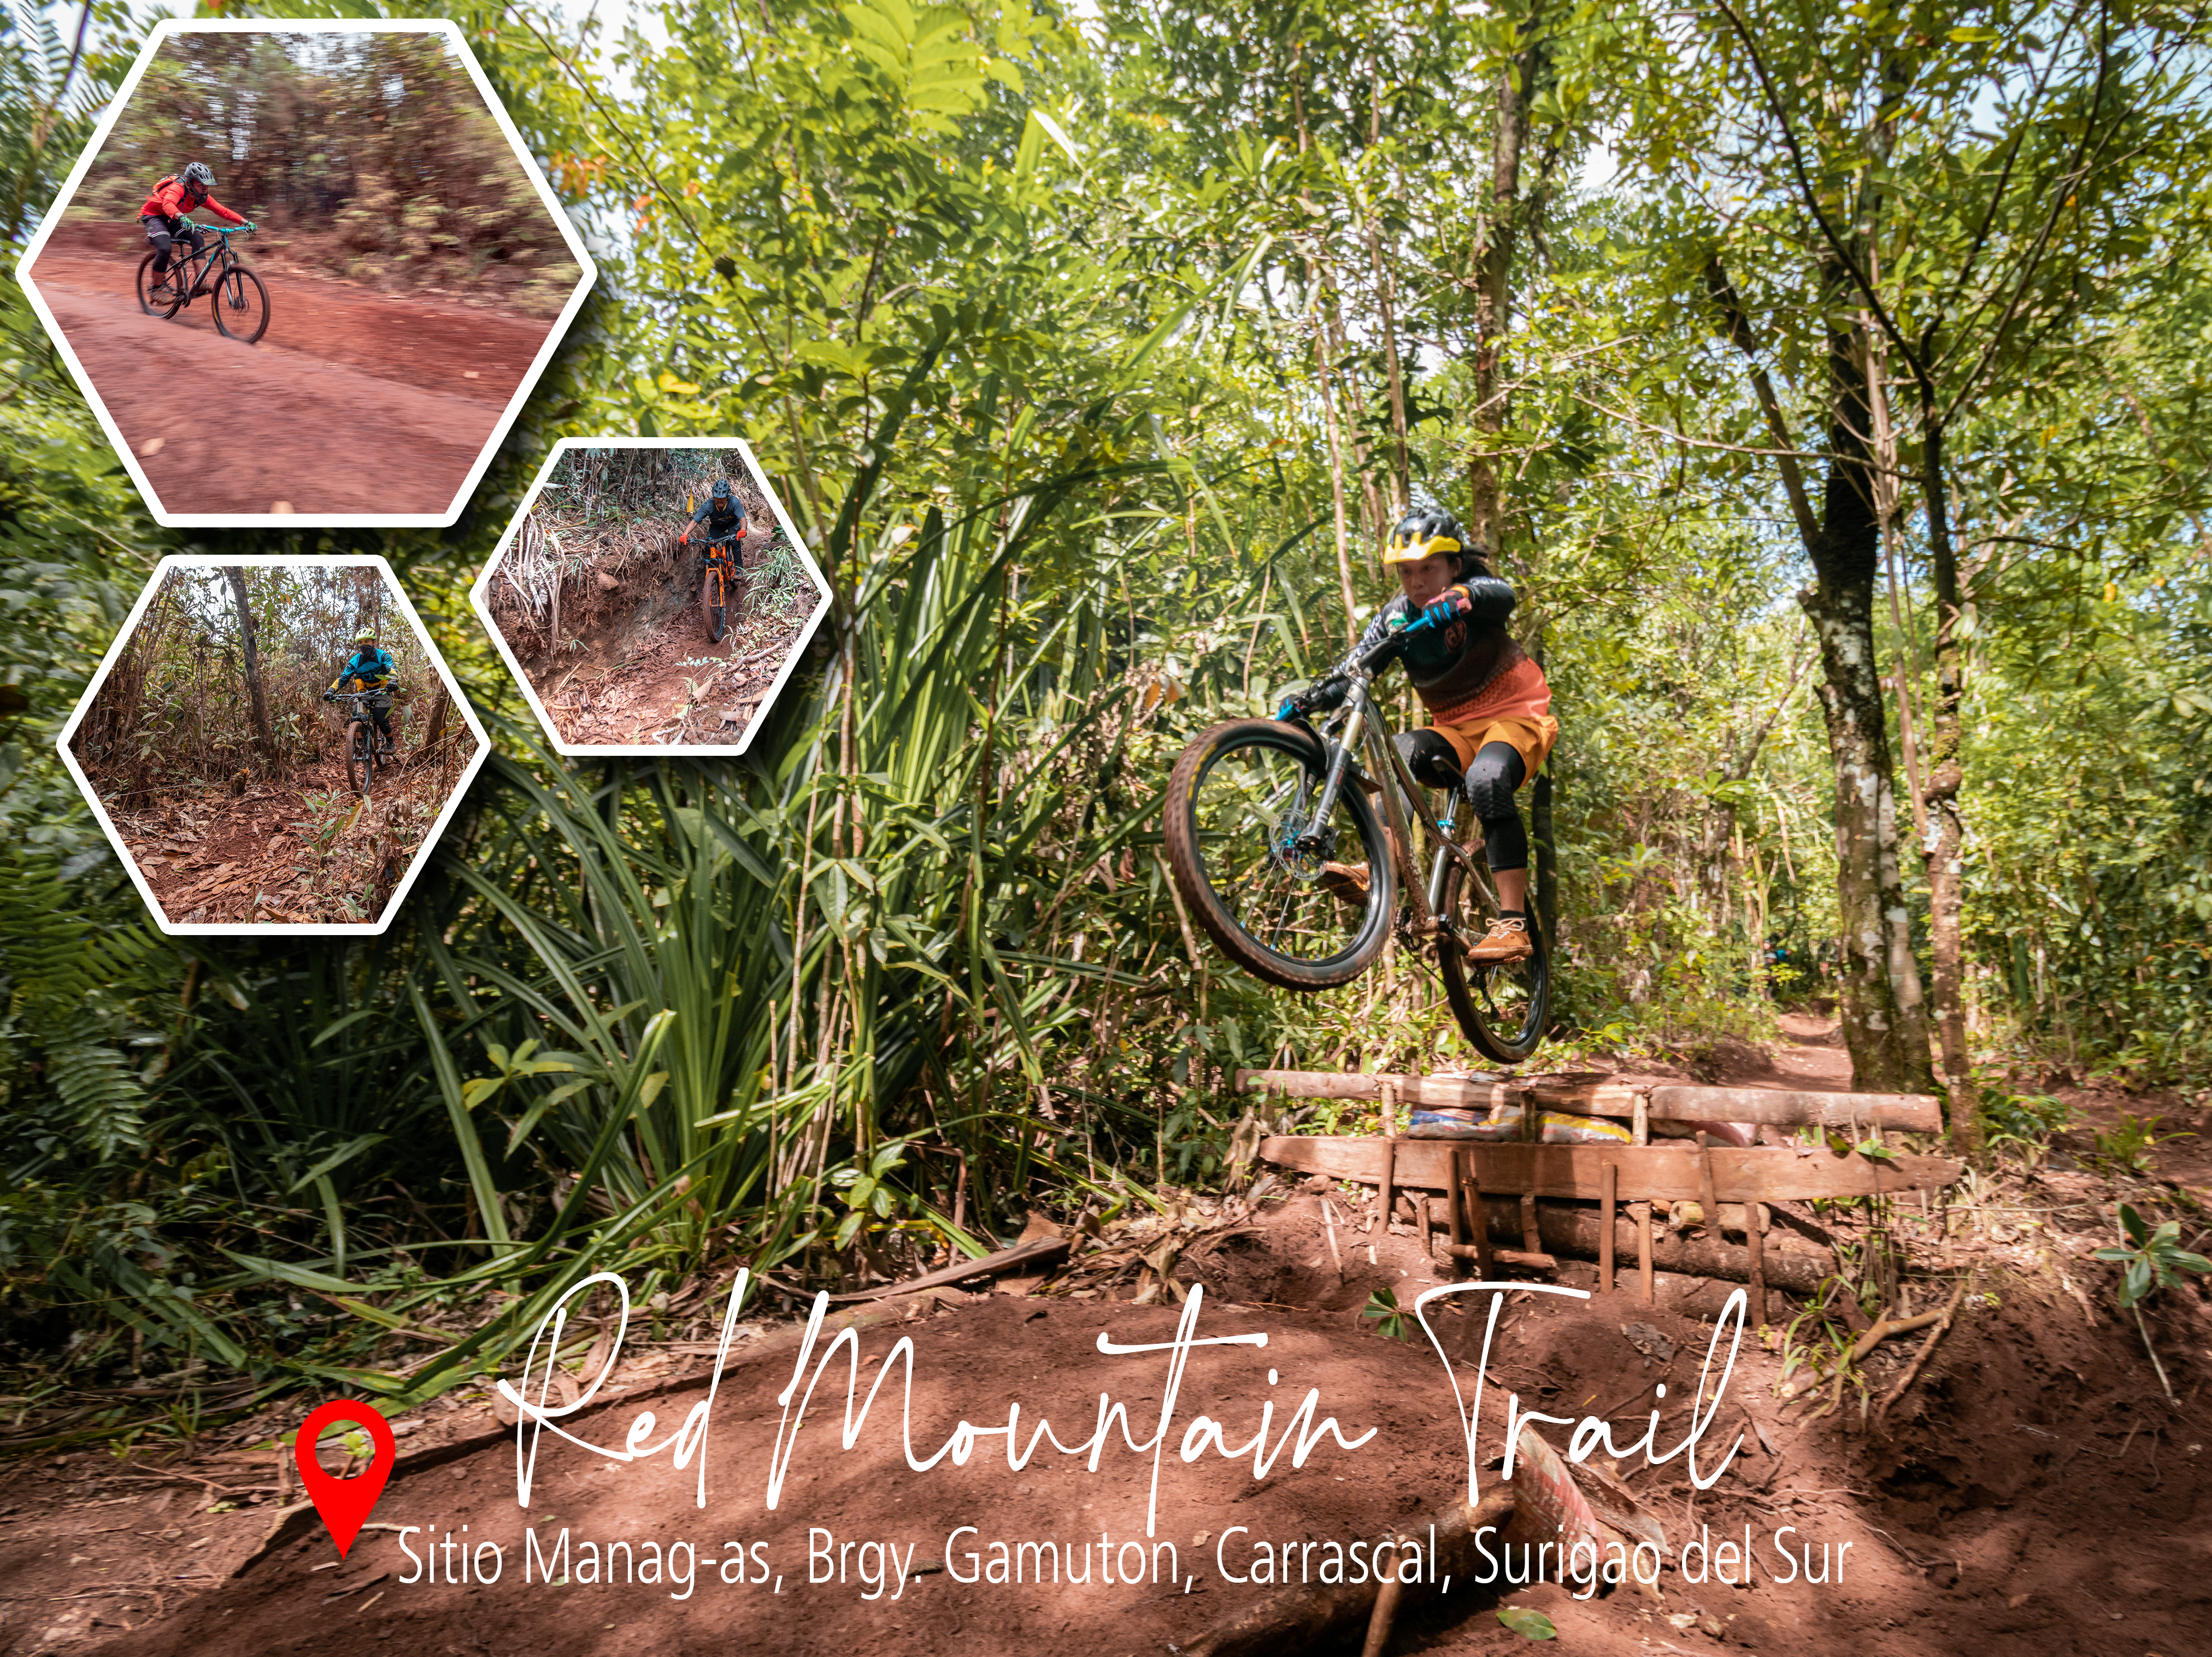 <b class="font-bara"><i class="bi bi-geo-fill h4"></i> CARRASCAL RED MOUNTAIN TRAIL</b> <br/>Shred, drift & jump, experience ecstasy by mother nature's lap at the Carrascal Red Mountain Trail in Brgy. Gamuton. A 3-trail bike paradise for the advanced and professional enduro/downhill enthusiasts. With a great view of Carrascal, your arduous ride will surely all be worth it.